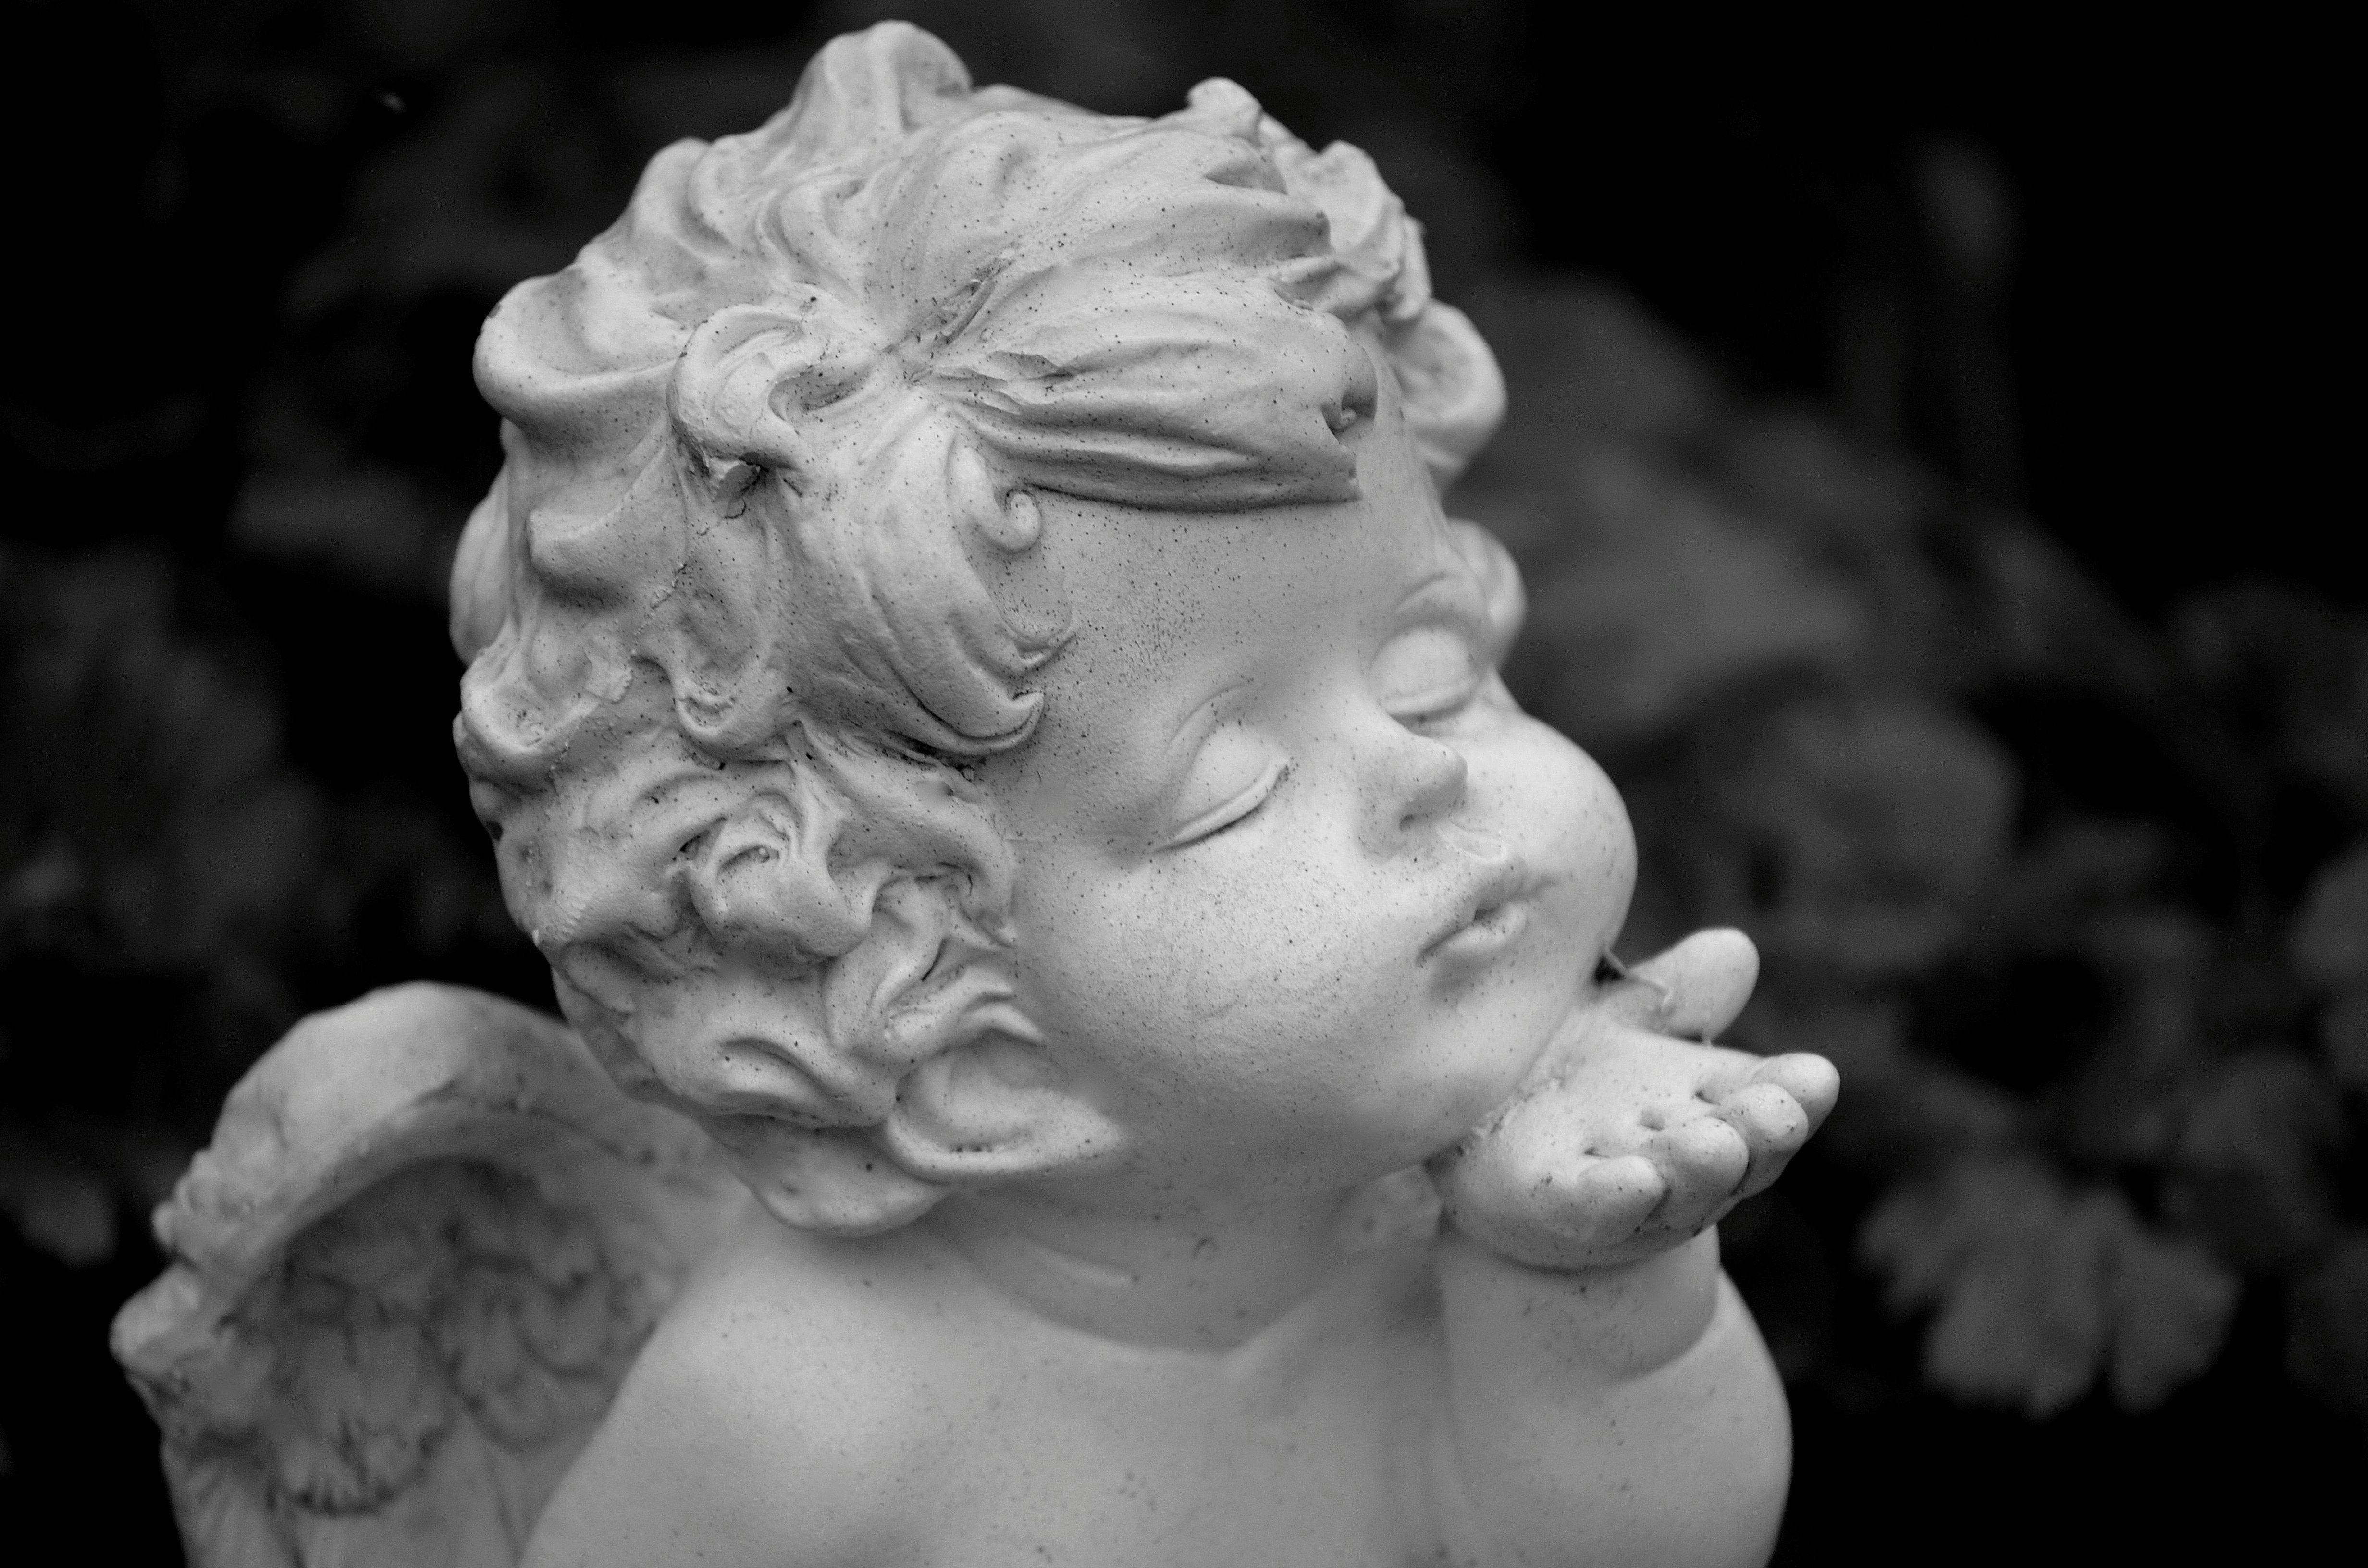 crying baby angel statue